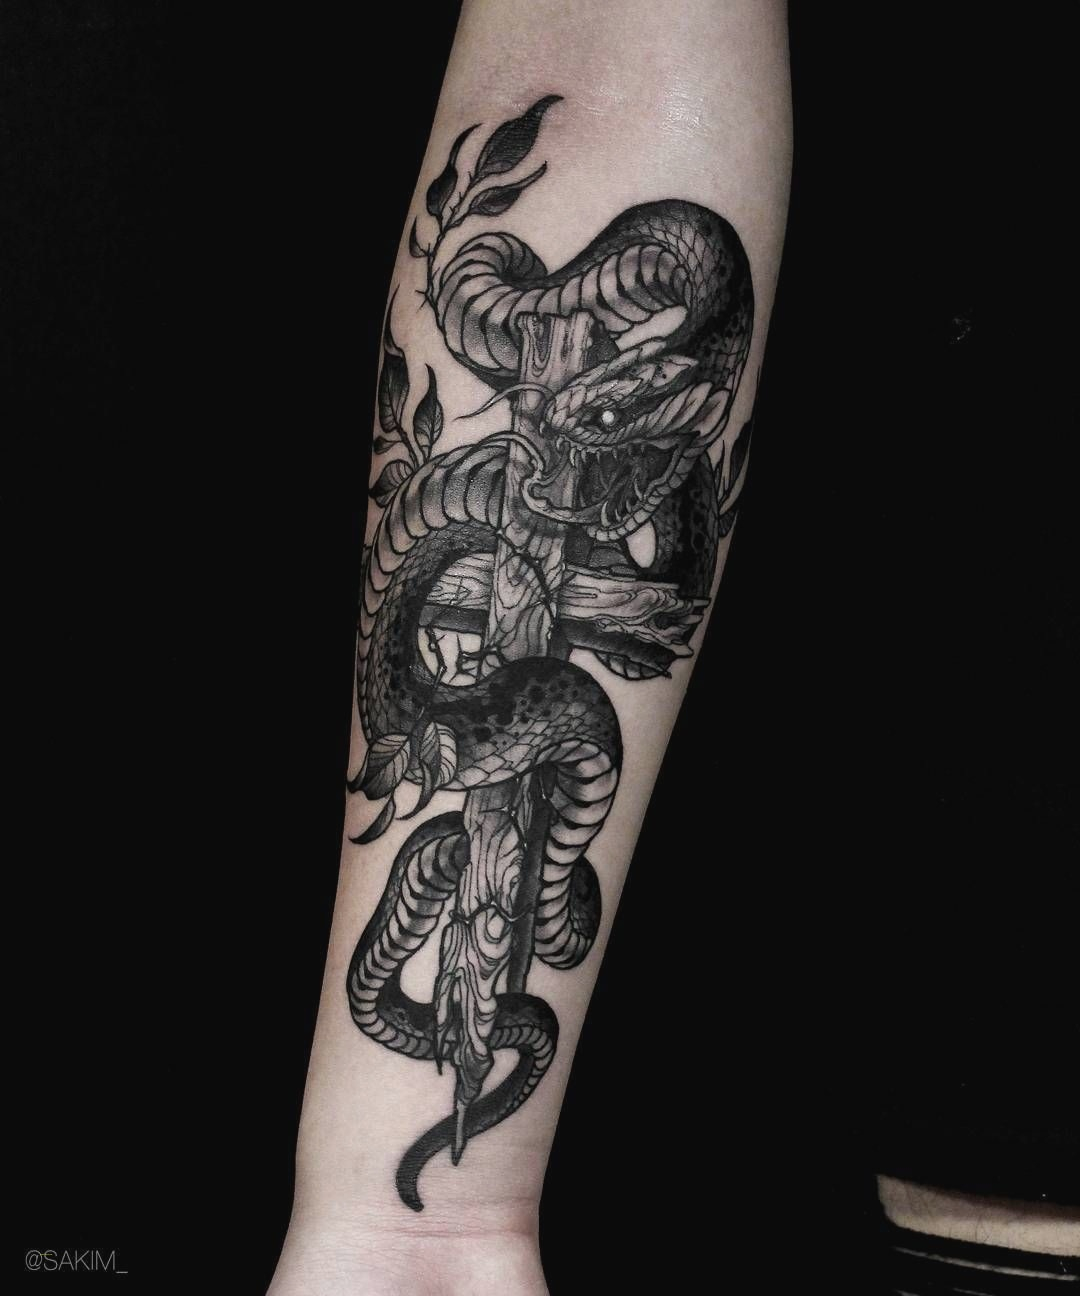 Specimen Mens Sleeve Tattoo Designs This Year Visit To Reads intended for dimensions 1080 X 1296